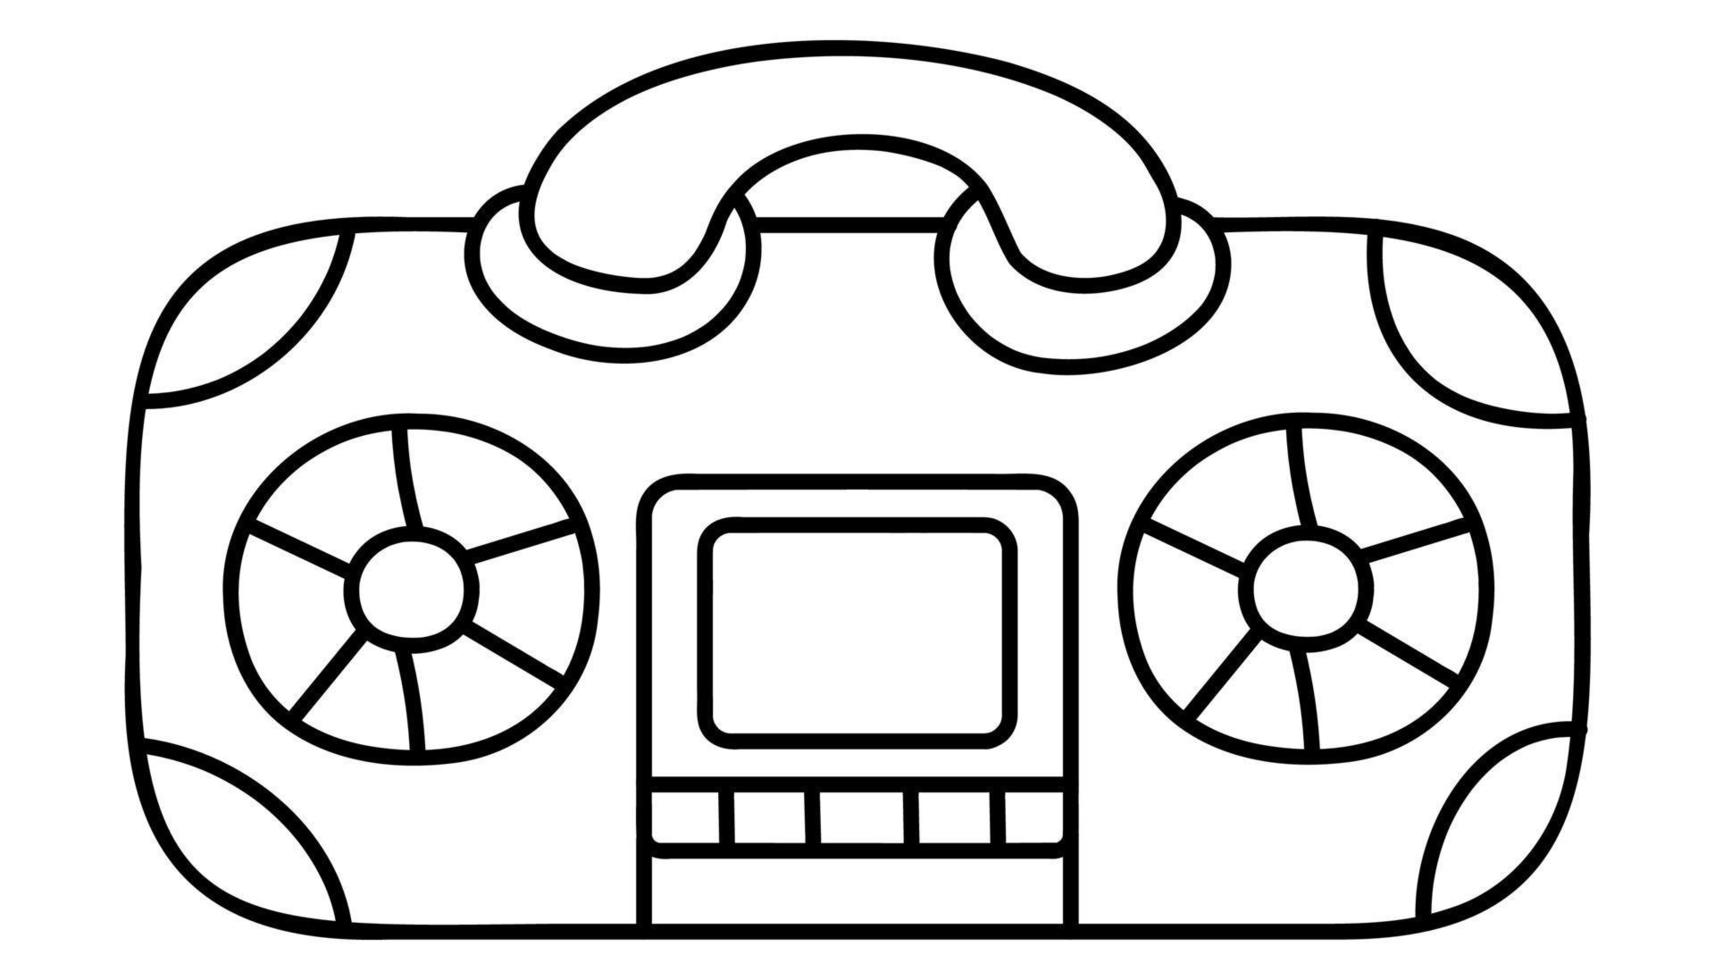 Cute doodle record player from the collection of girly stickers. Cartoon color vector illustration.